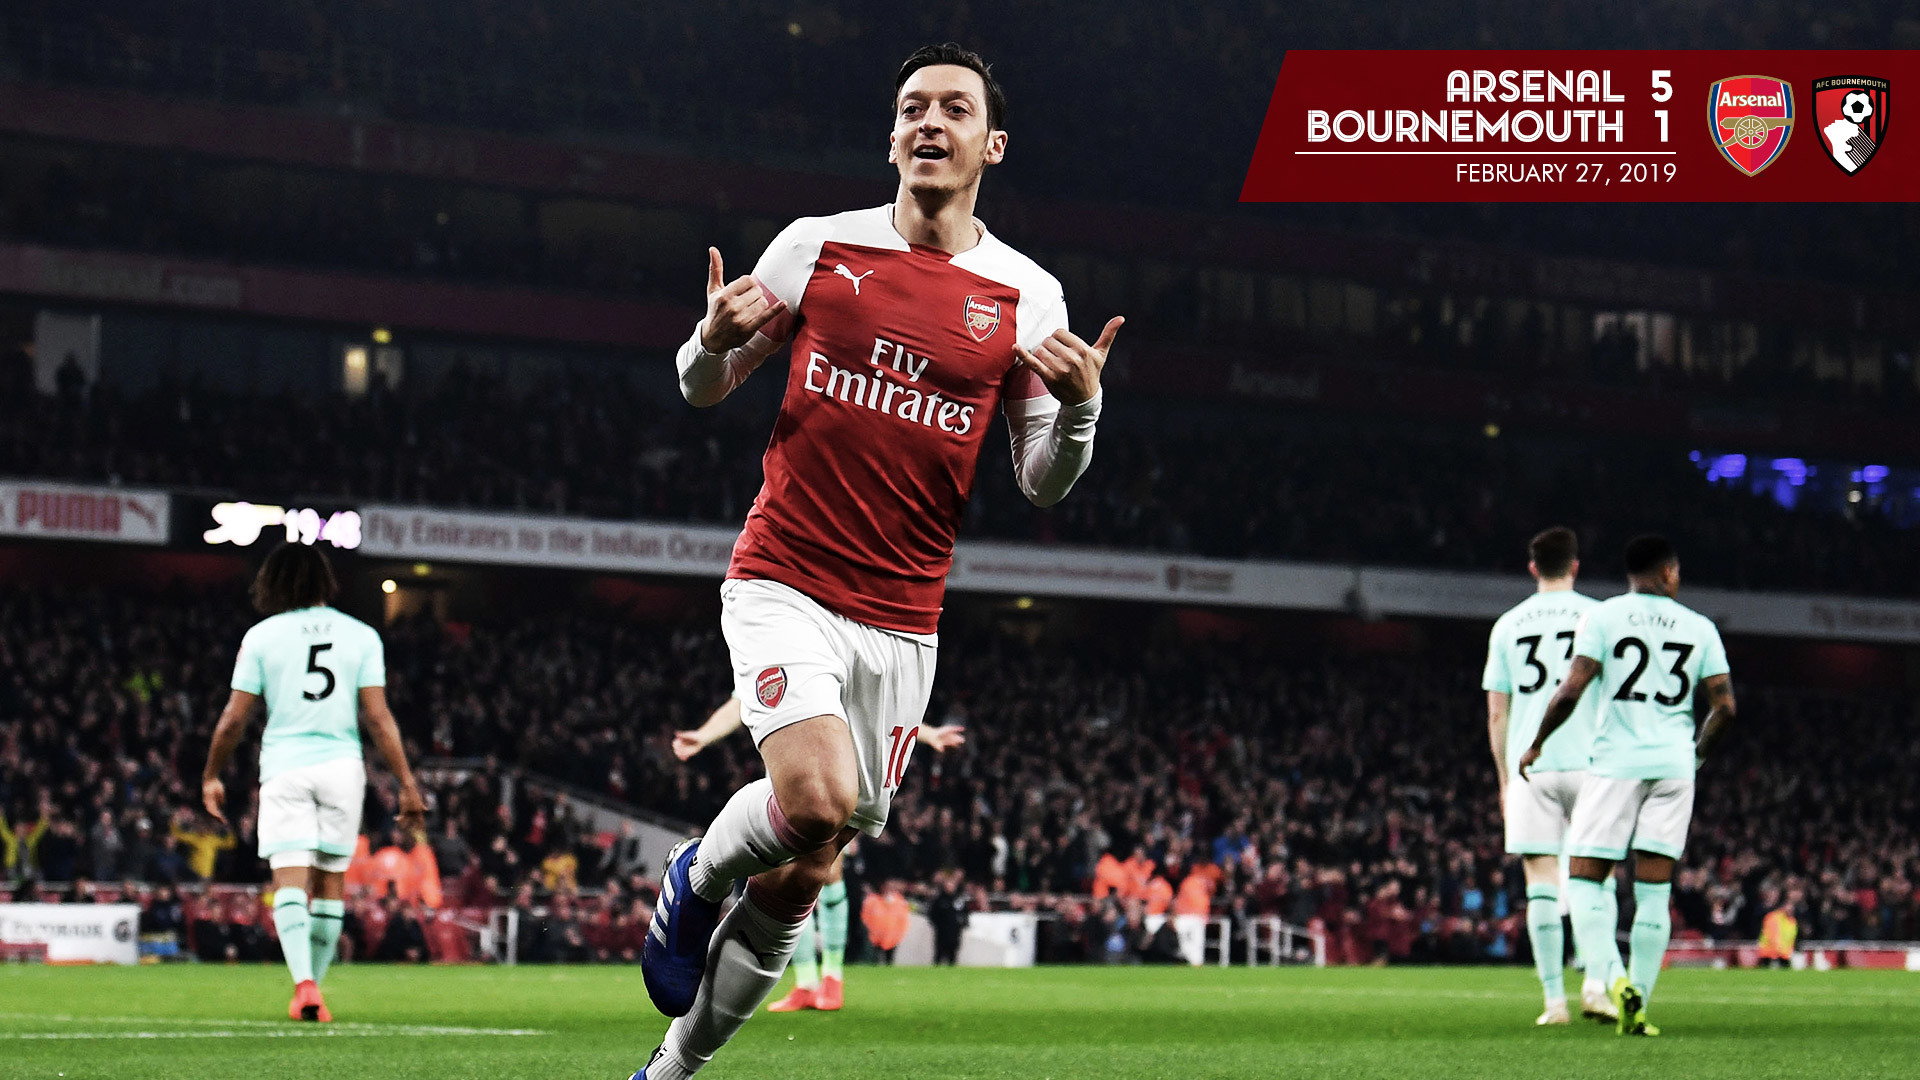 Arsenal Wallpapers 73 Pictures